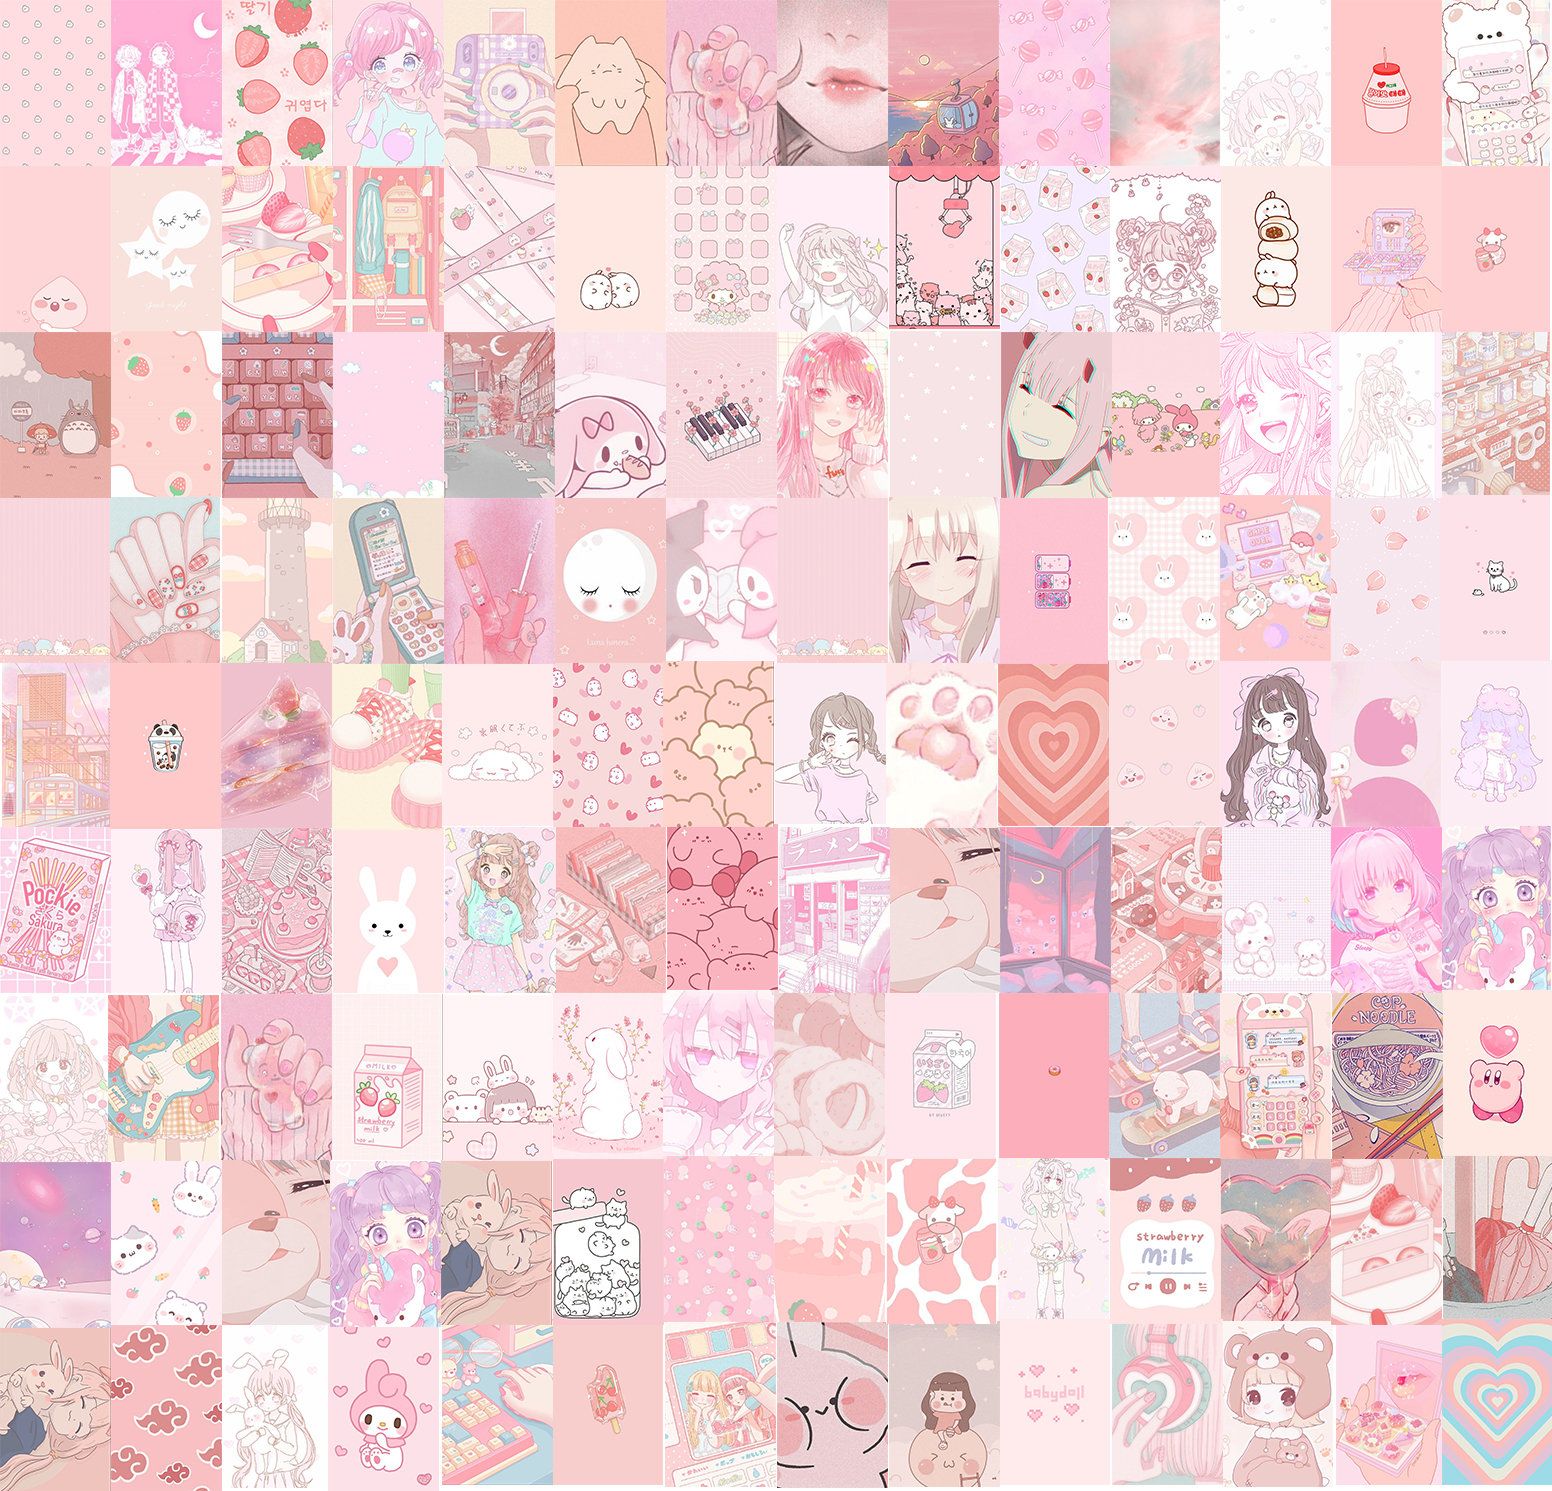 A collage of pink and white pictures - Kawaii, pink anime